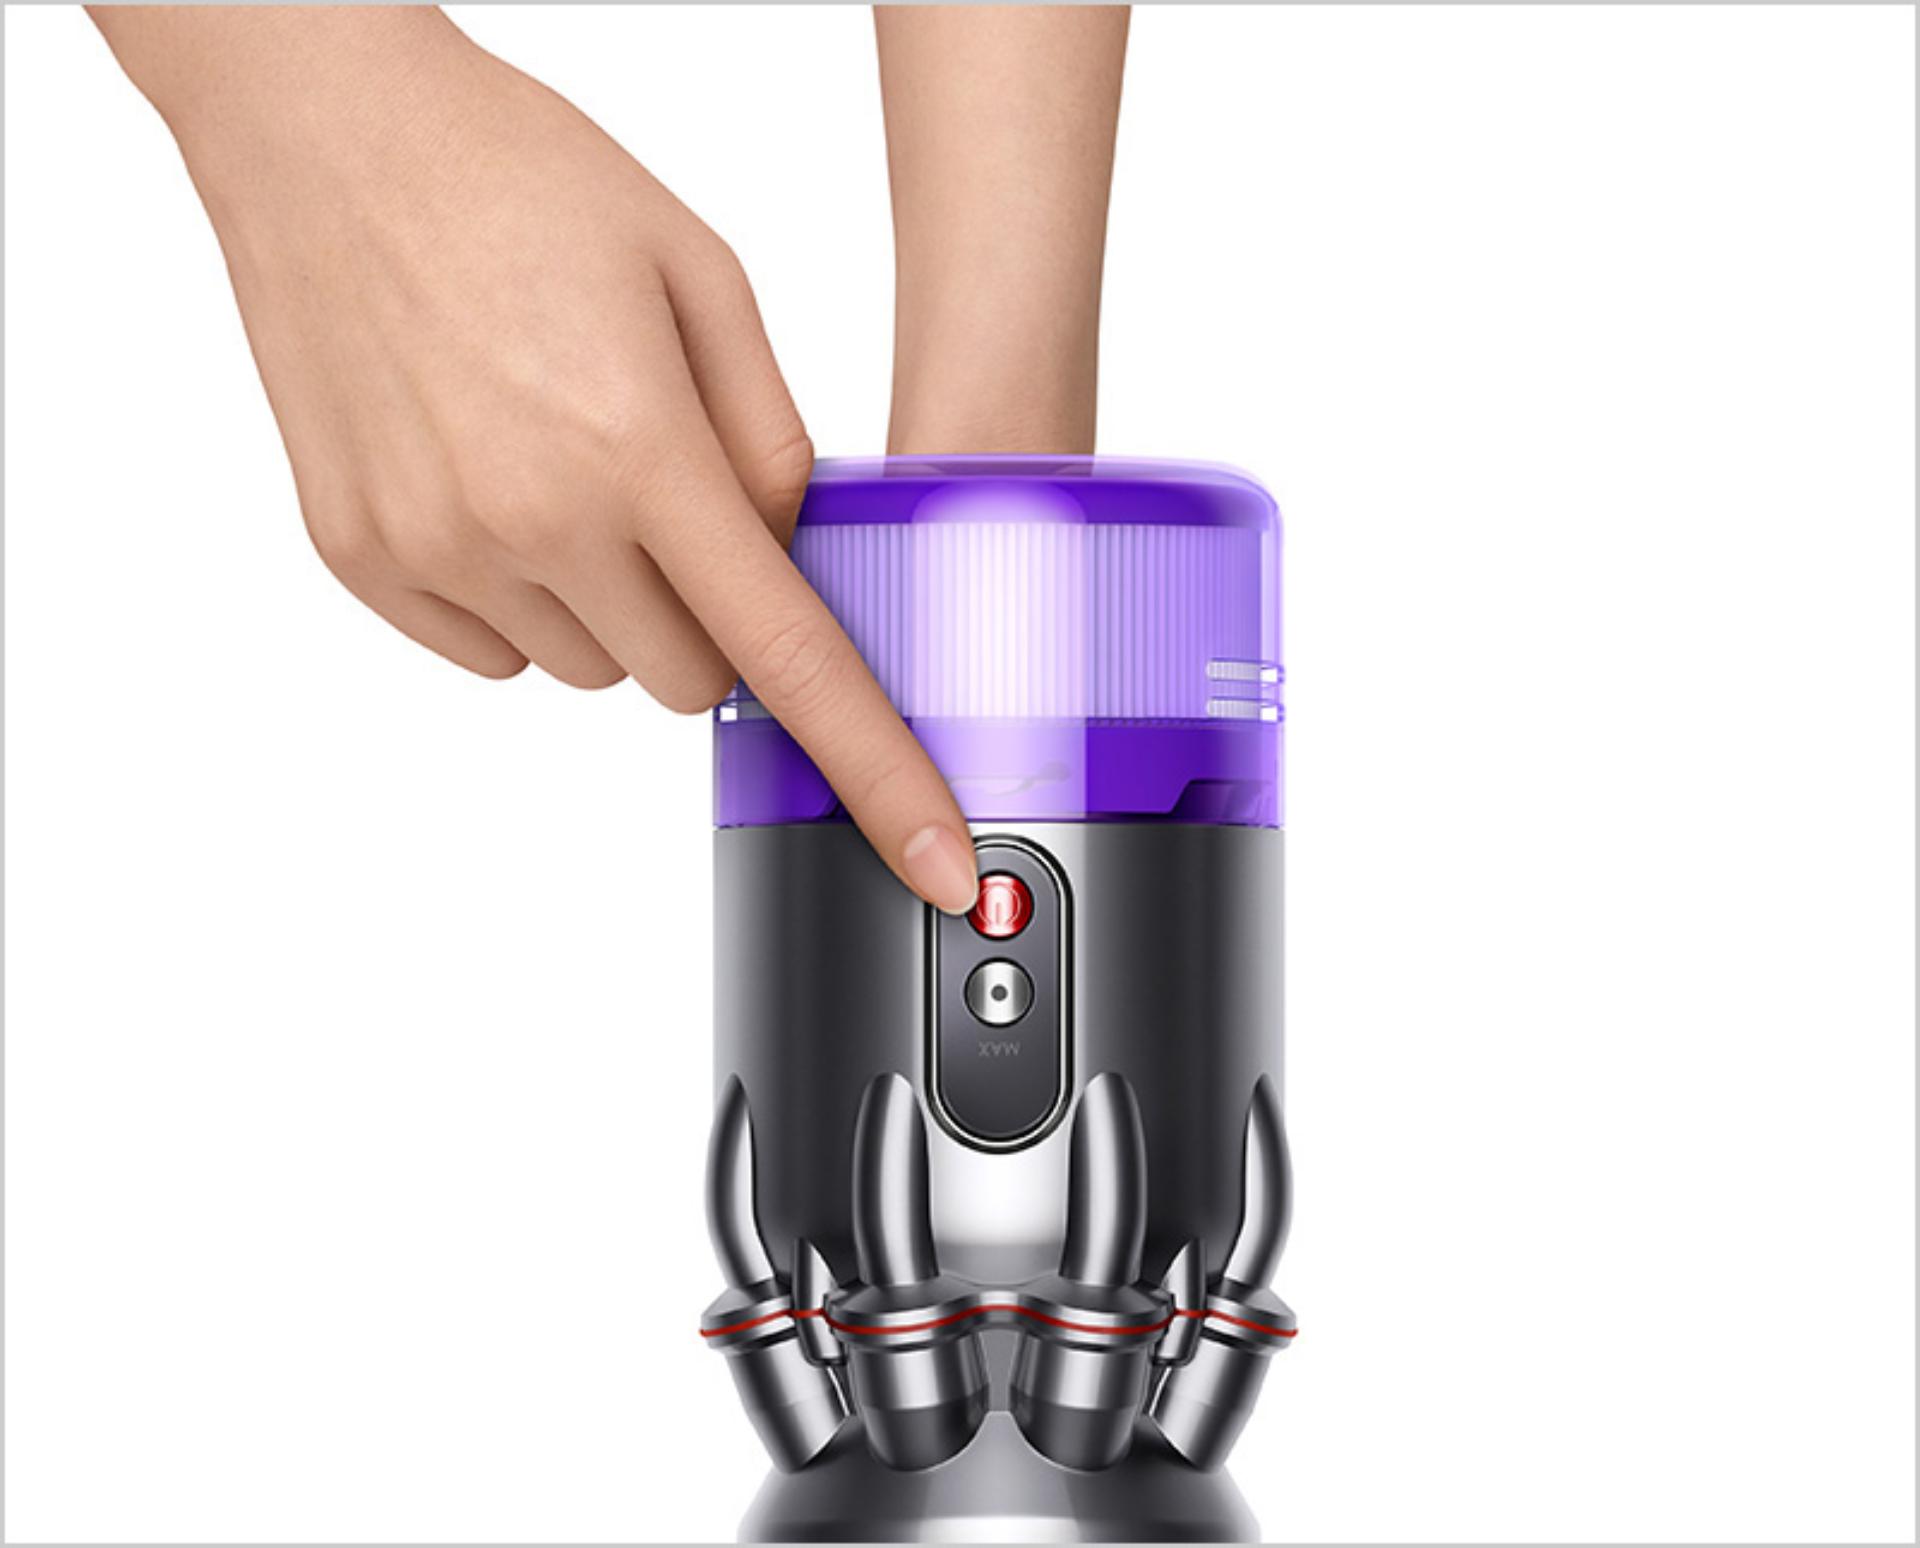 Close-up of Dyson Micro power buttons